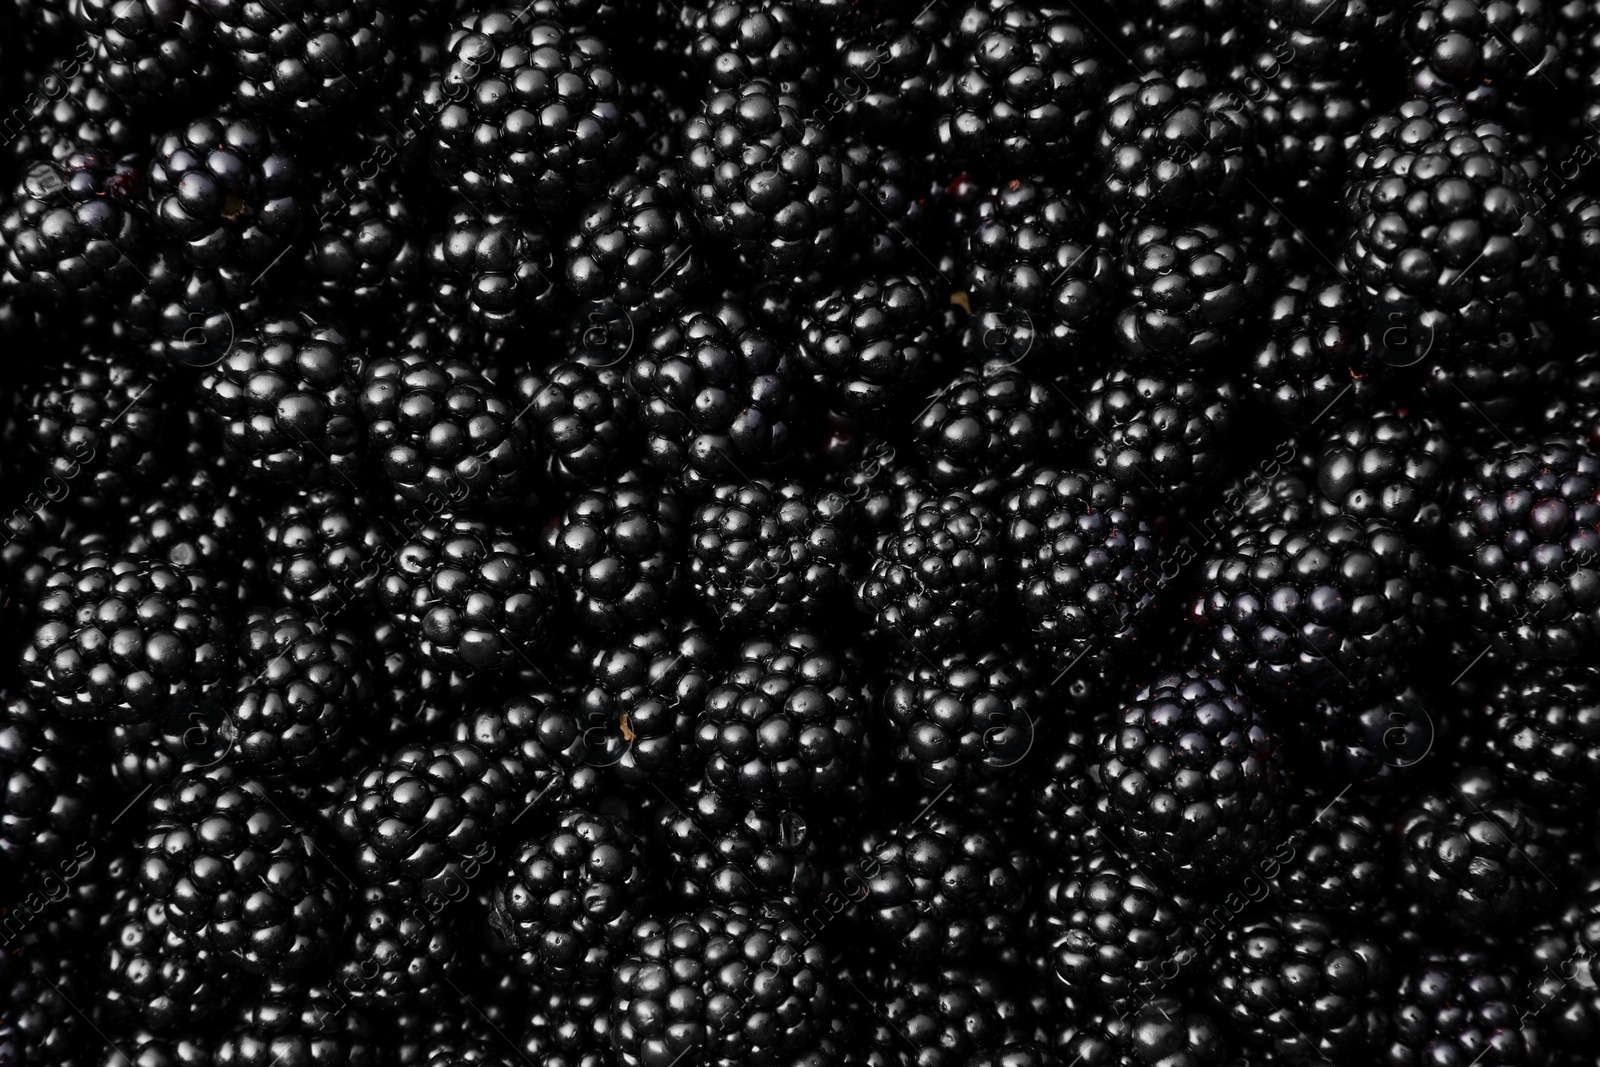 Photo of Many tasty ripe blackberries as background, closeup